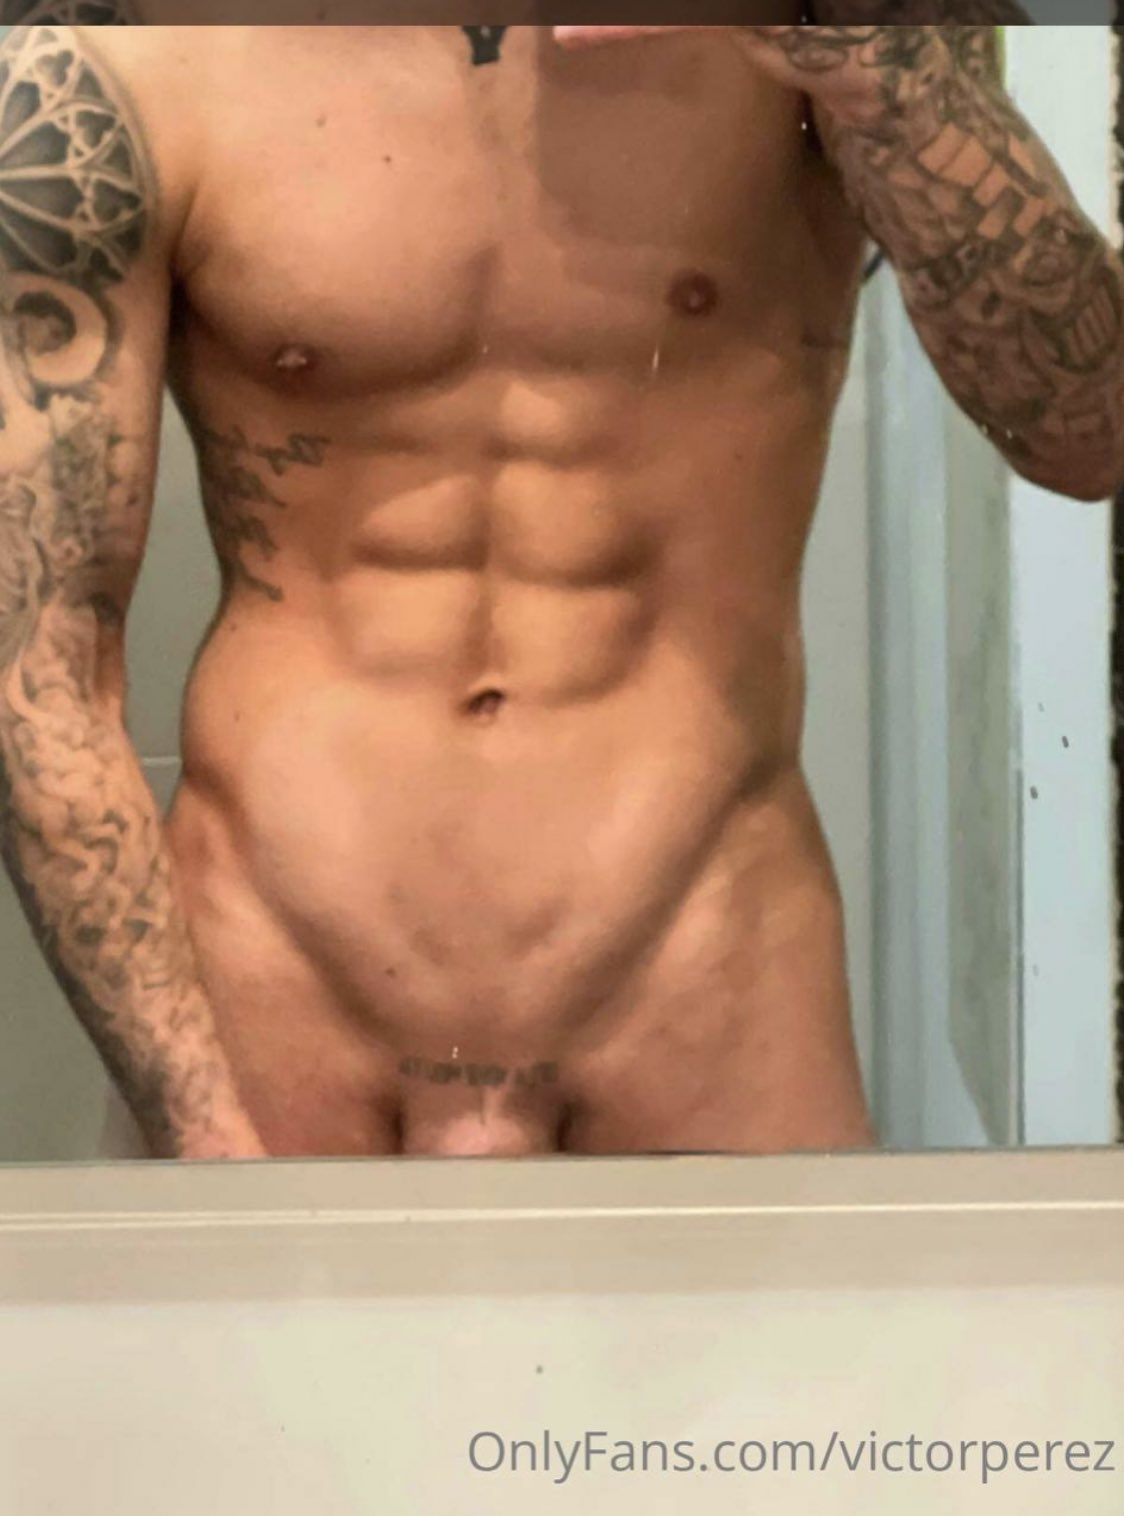 Onlyfans victor perez twitter